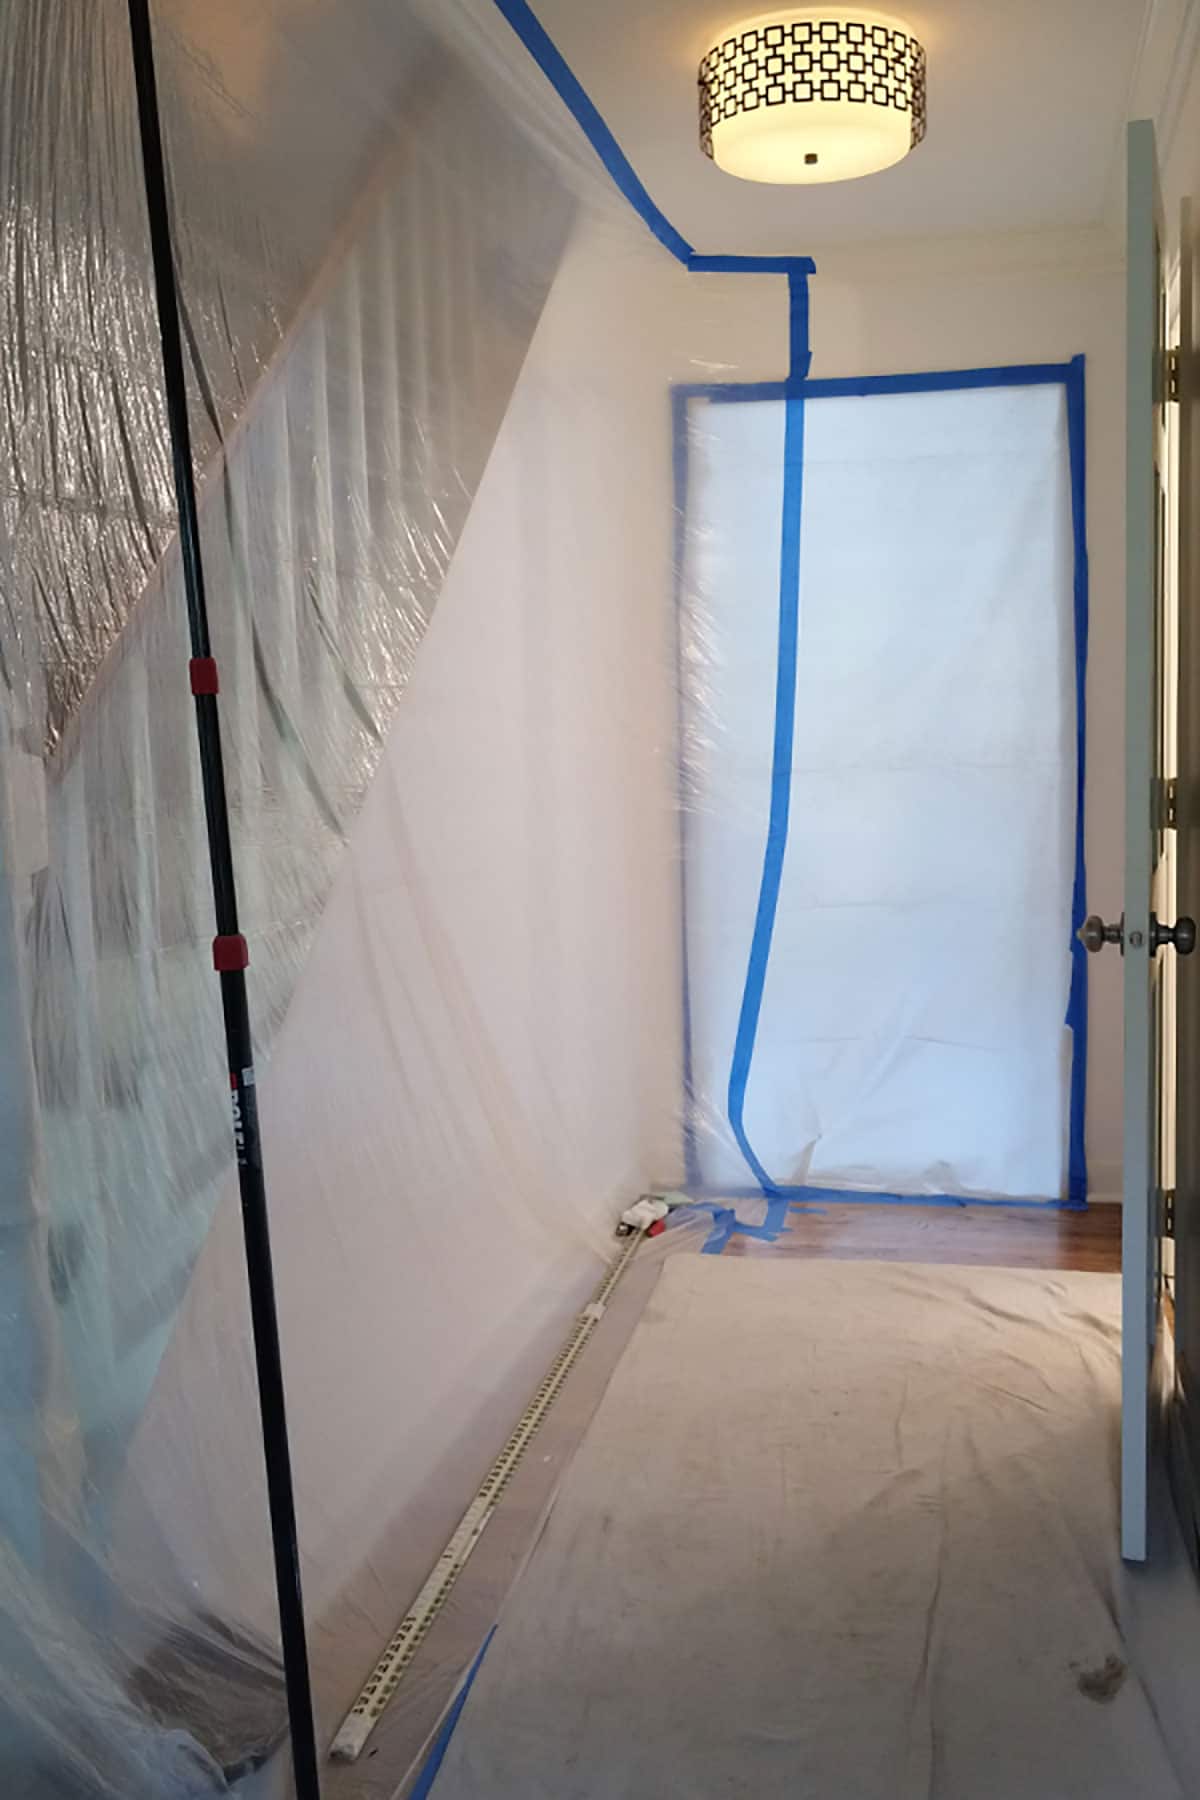 plastic wall coverings are a must during renovations